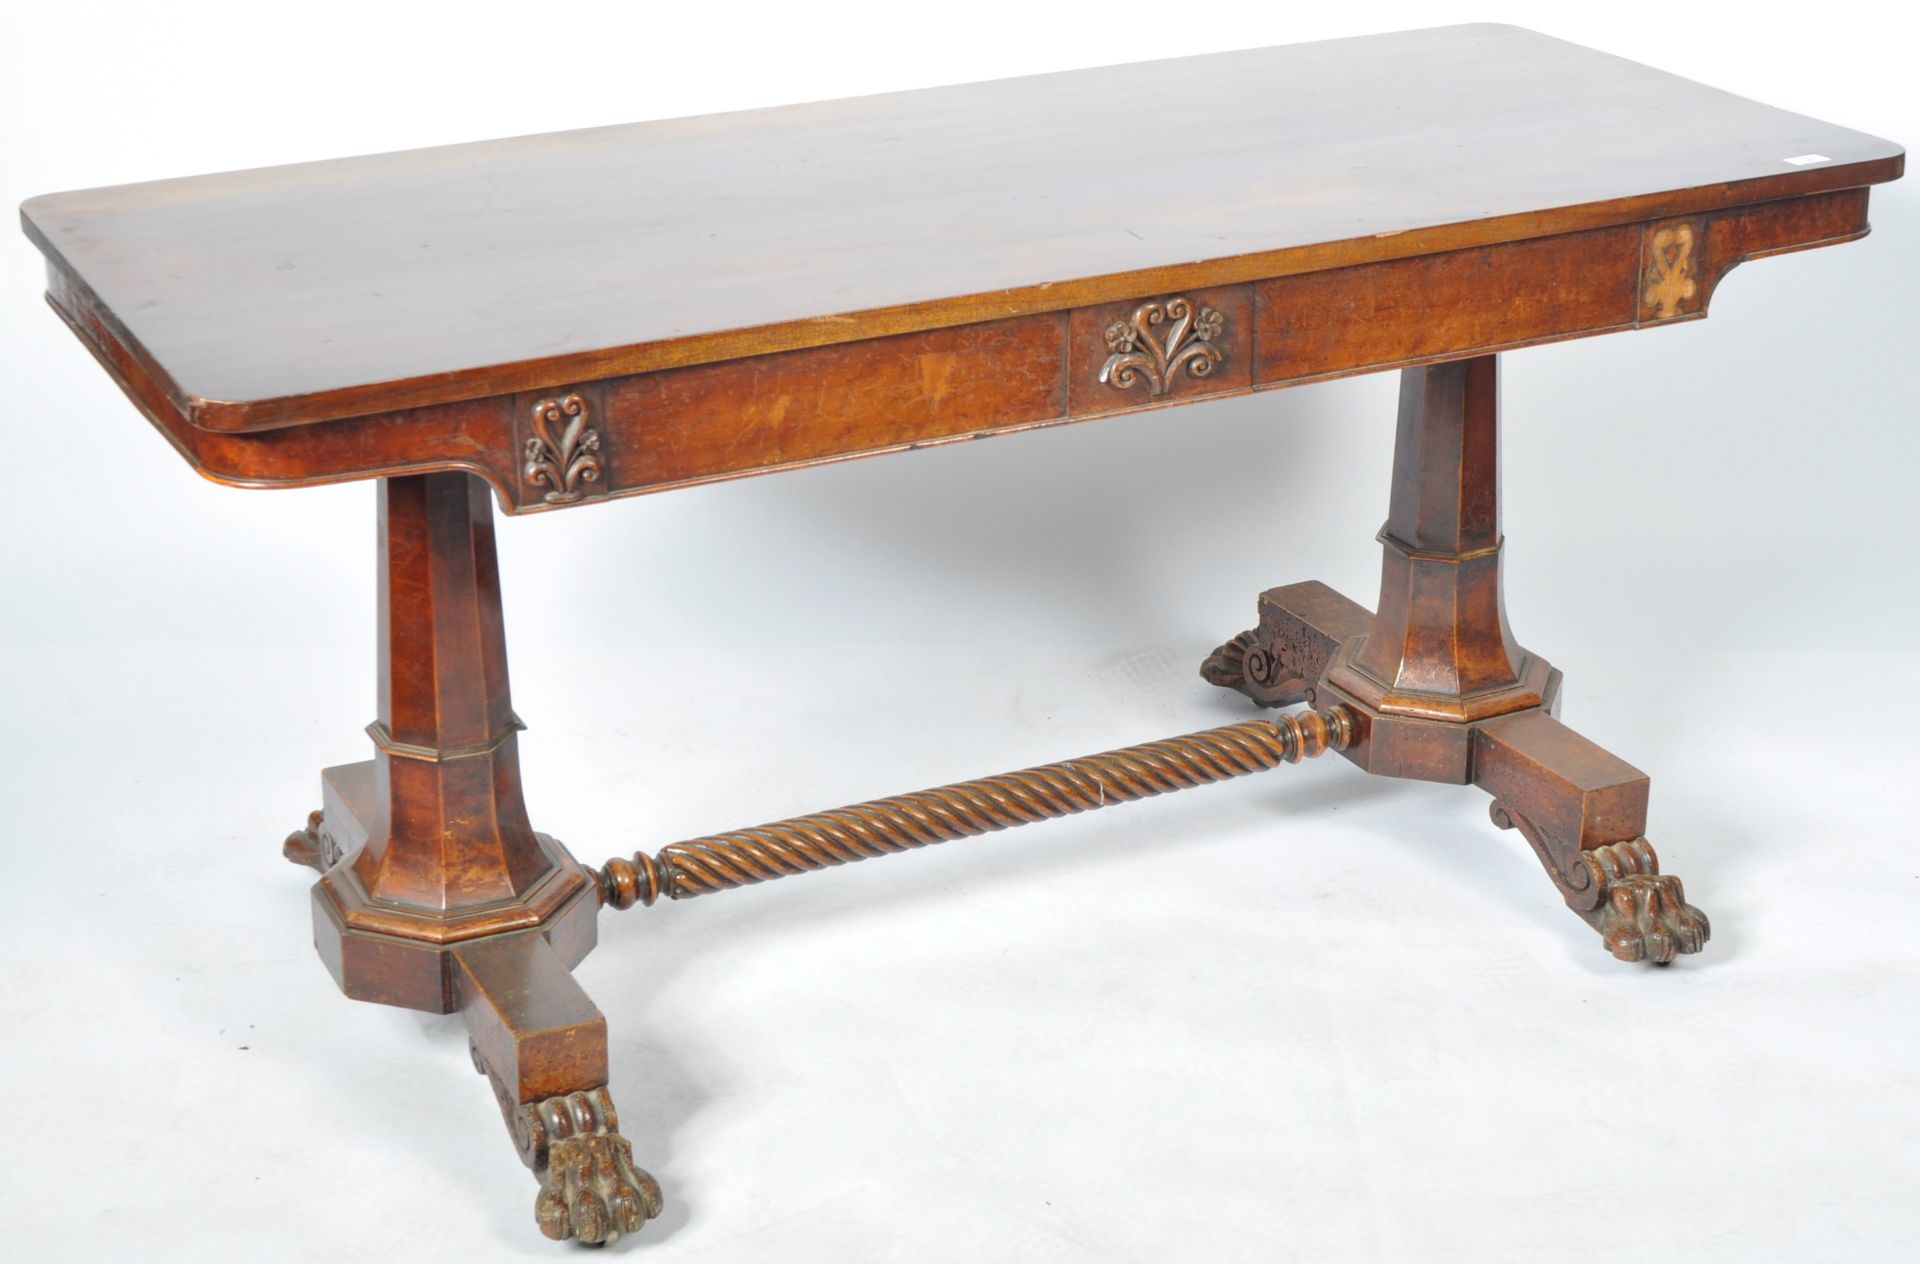 ANTIQUE 19TH CENTURY MAHOGANY LIBRARY TABLE - Image 3 of 11